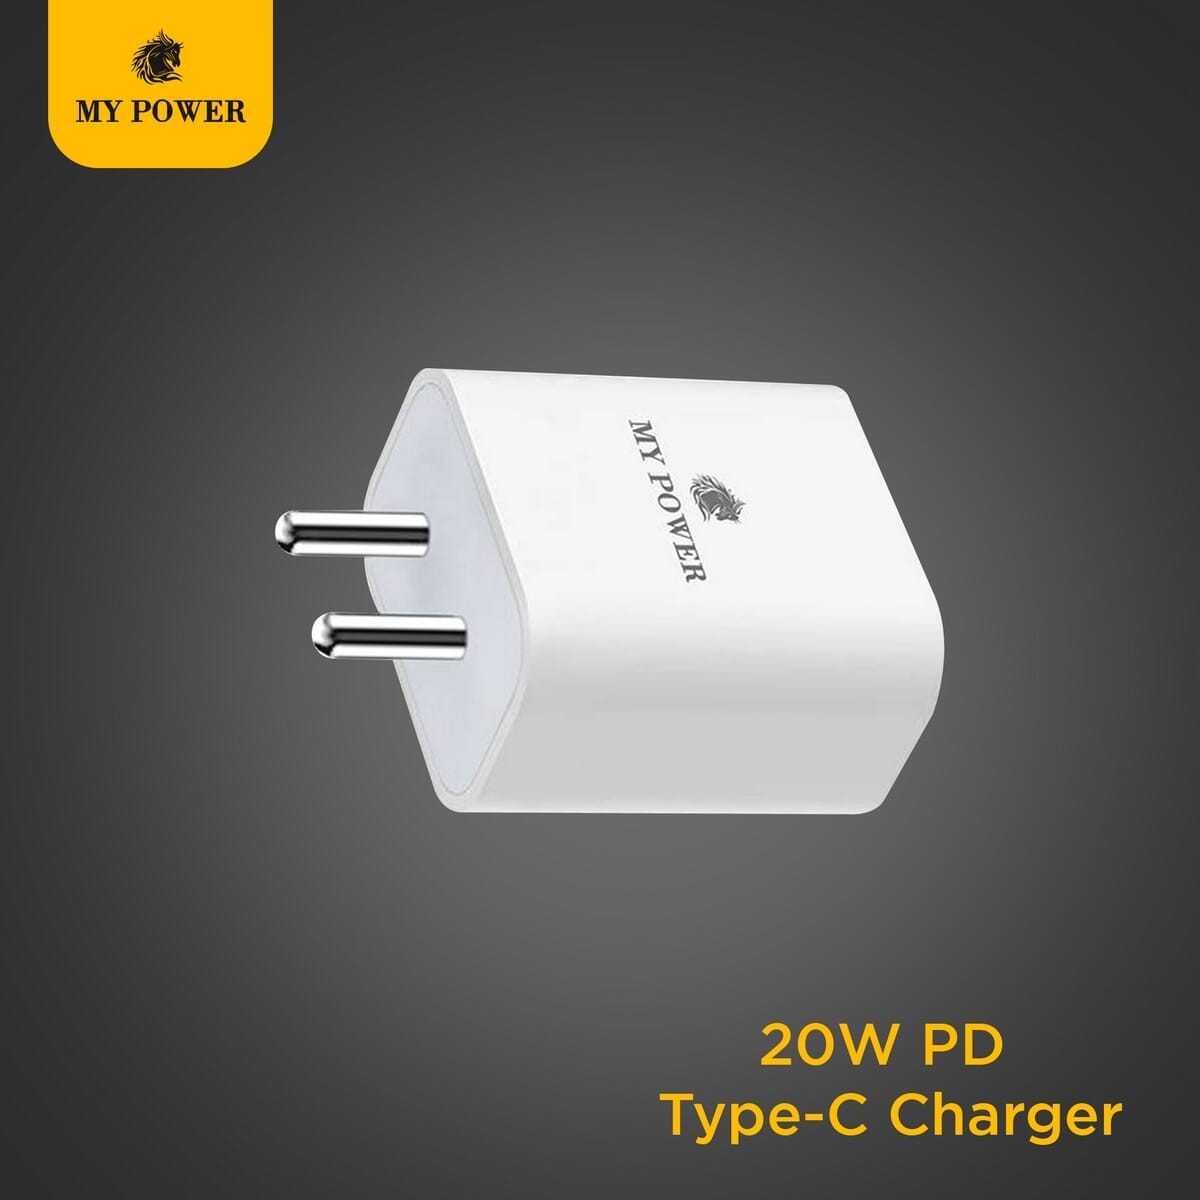 My Power 20 Watt PD Adaptor , Pd Charger, Type C Output Charger White colour MP98pd Dock Round Indian Pin